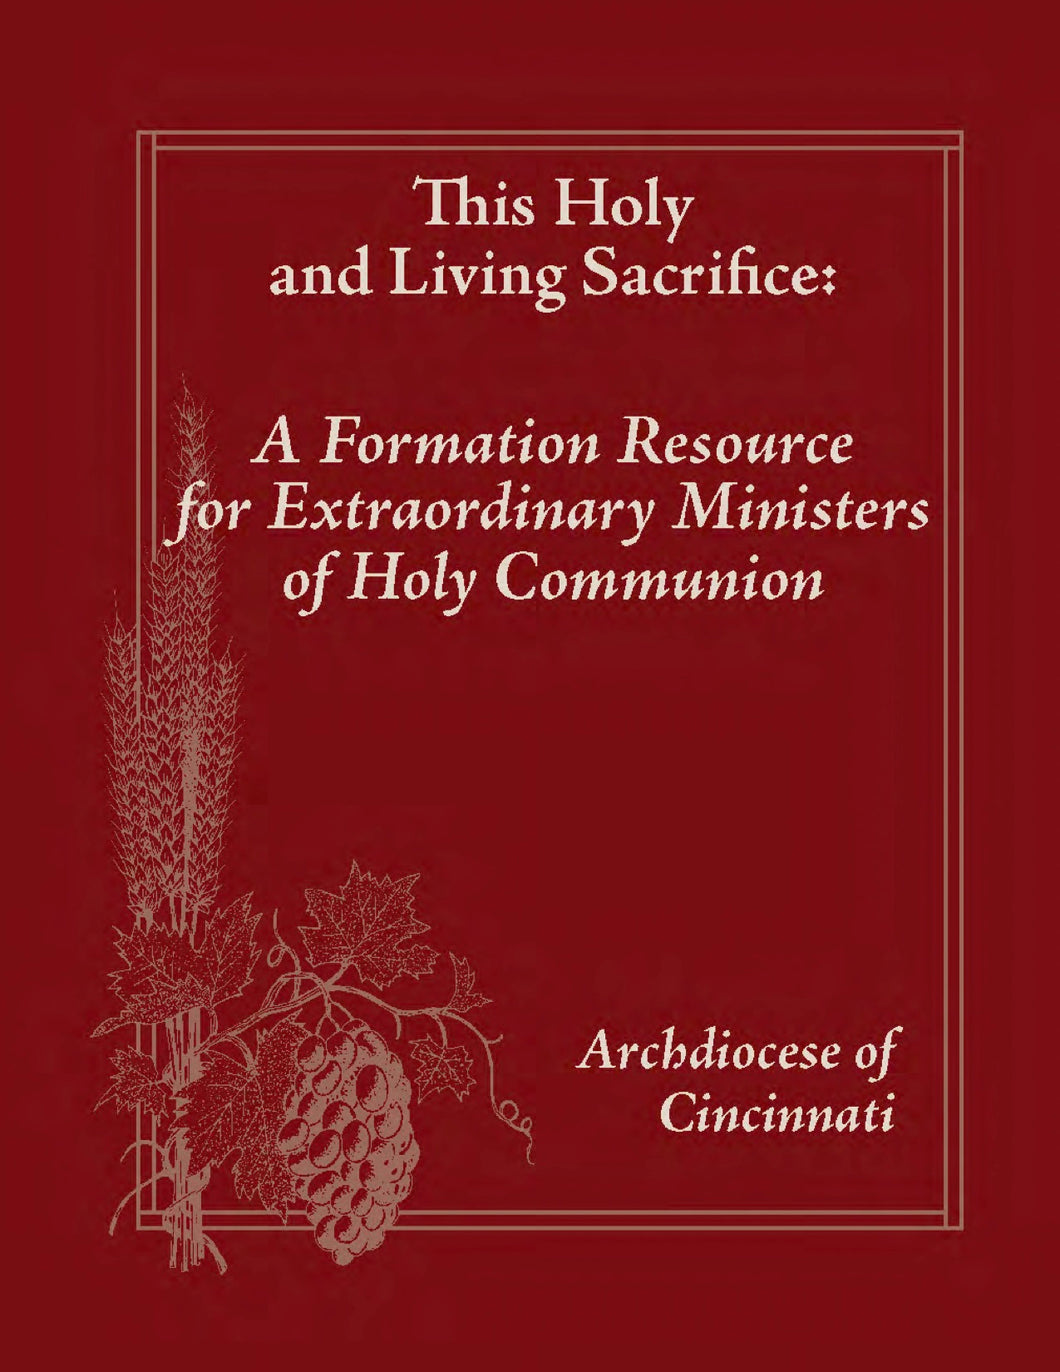 This Holy and Living Sacrifice: A Formation Resource for Extraordinary Ministers of Holy Communion